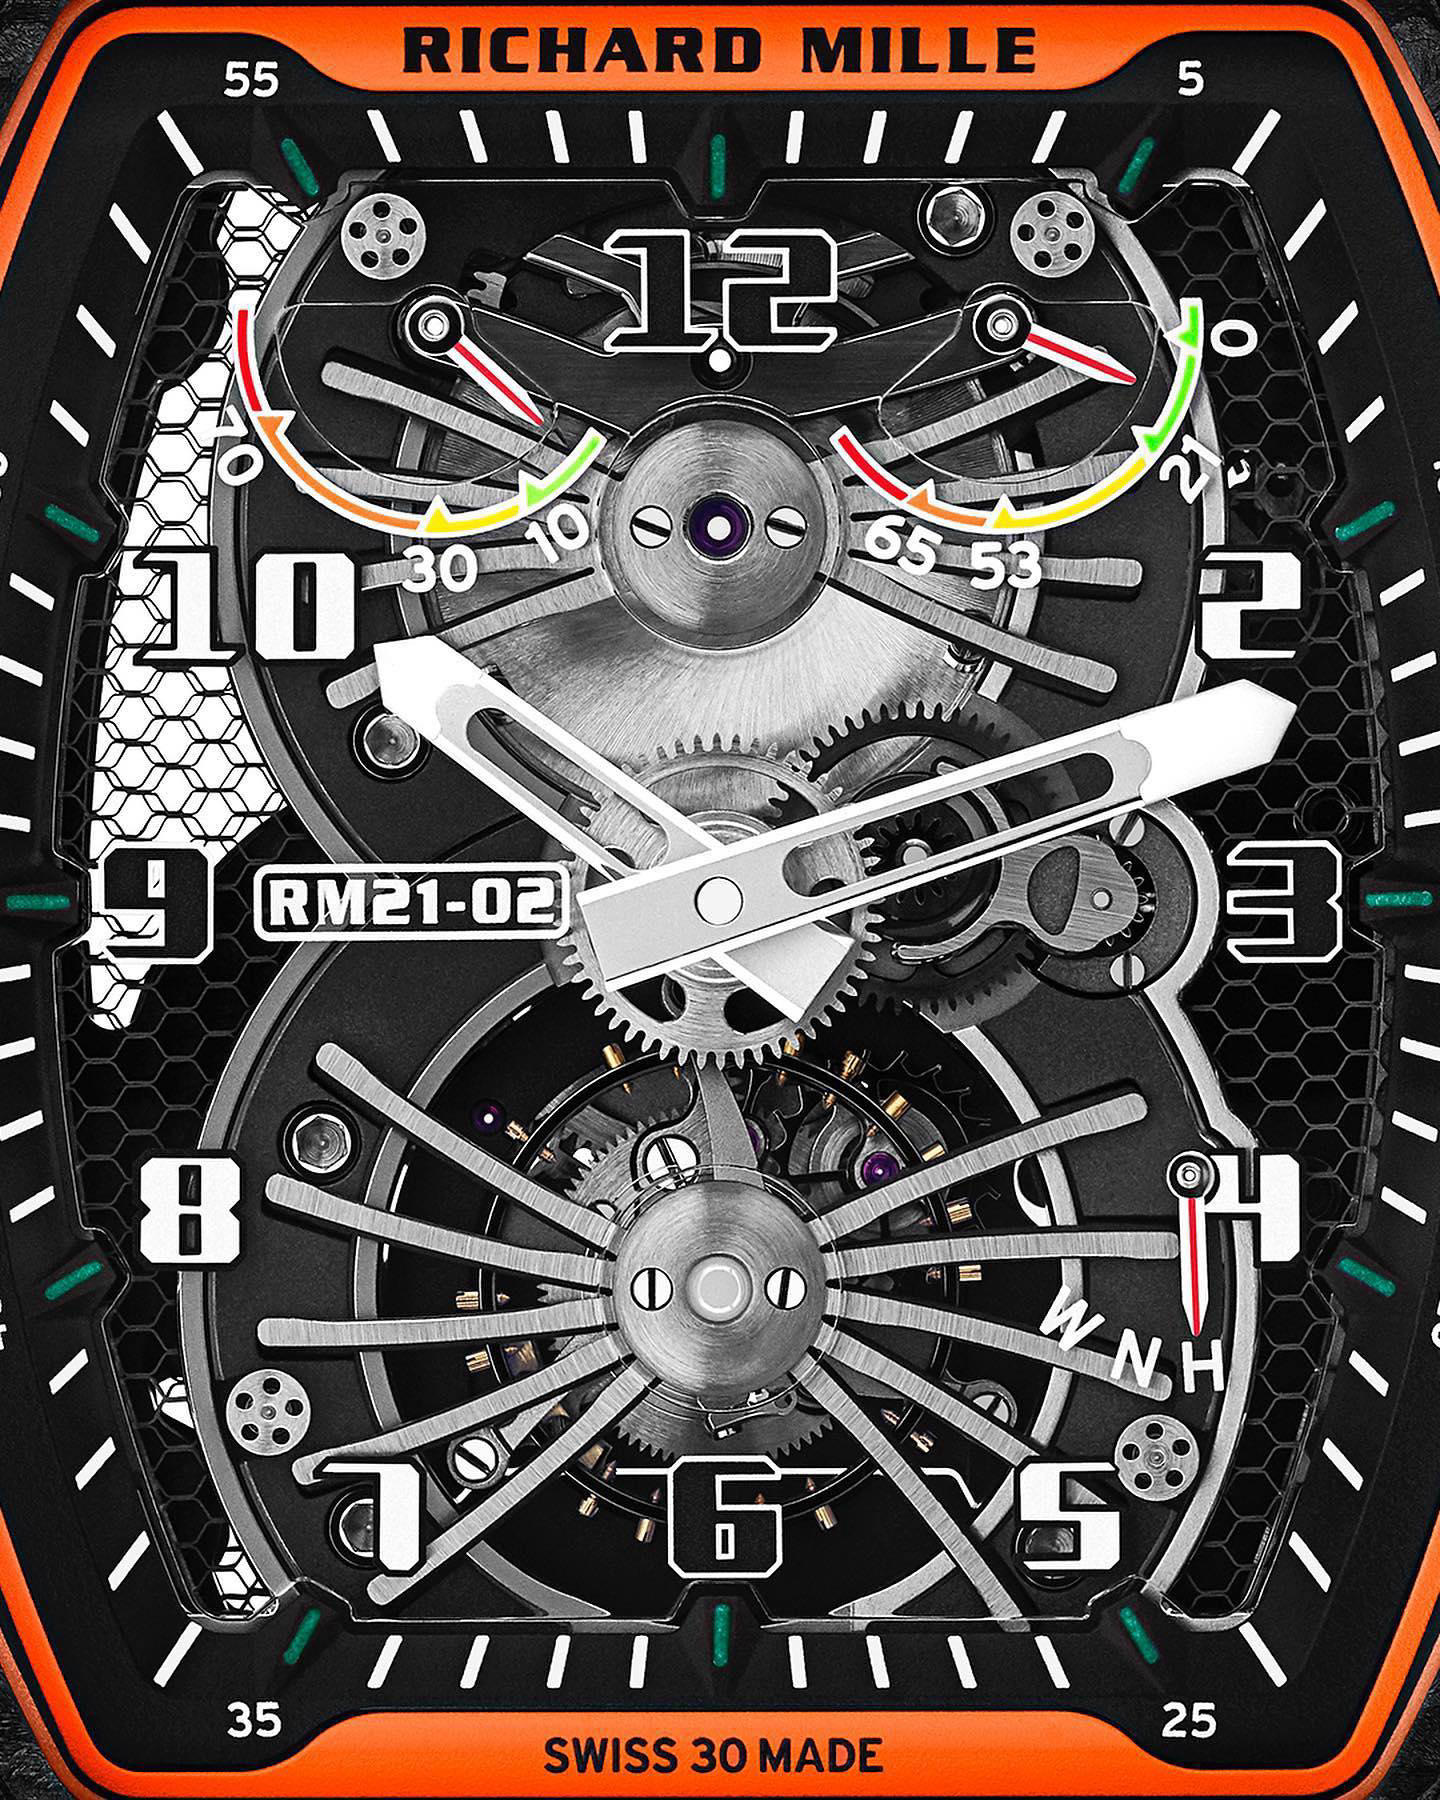 Richard Mille - The winding barrel and the tourbillon are both placed in the central depth of this a